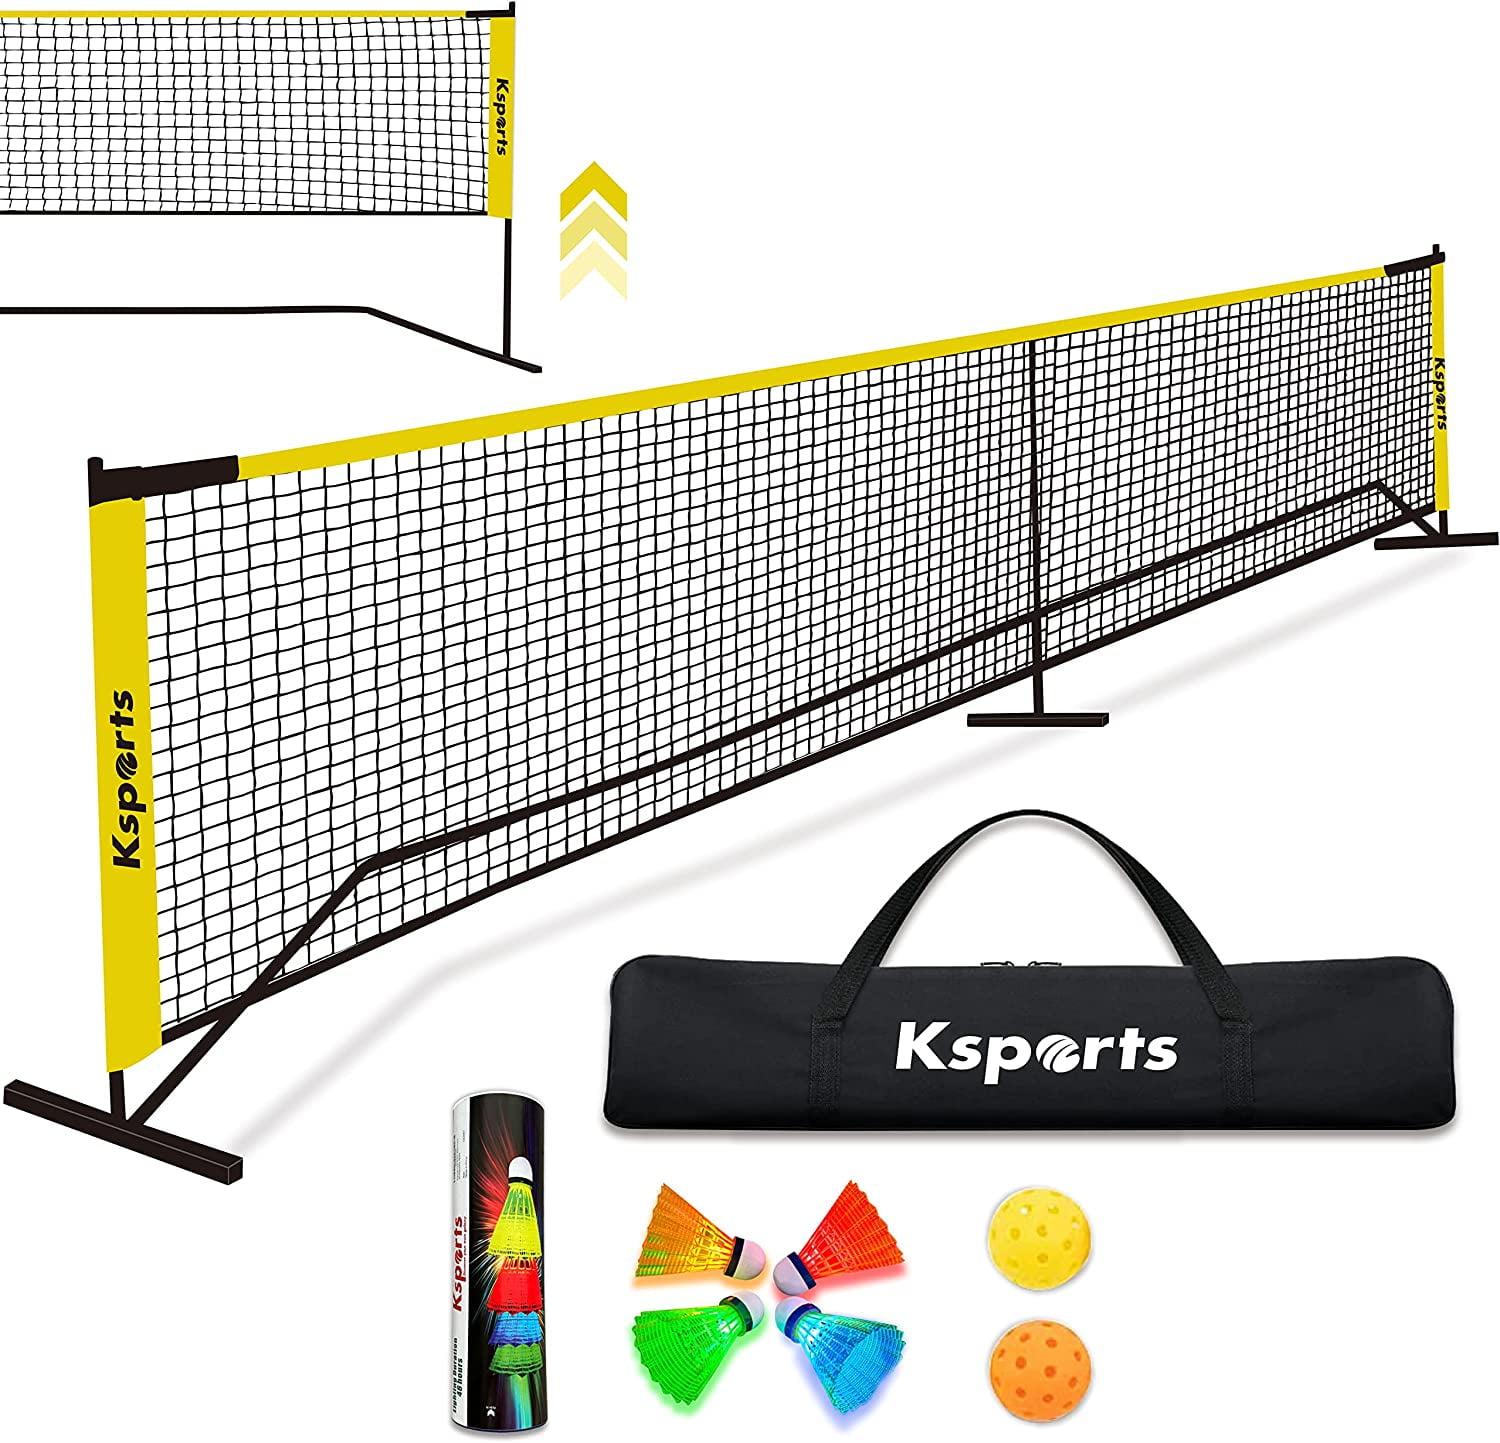 Ksports Regulation Size Pickleball Net 22 Feet Yellow, can be Used